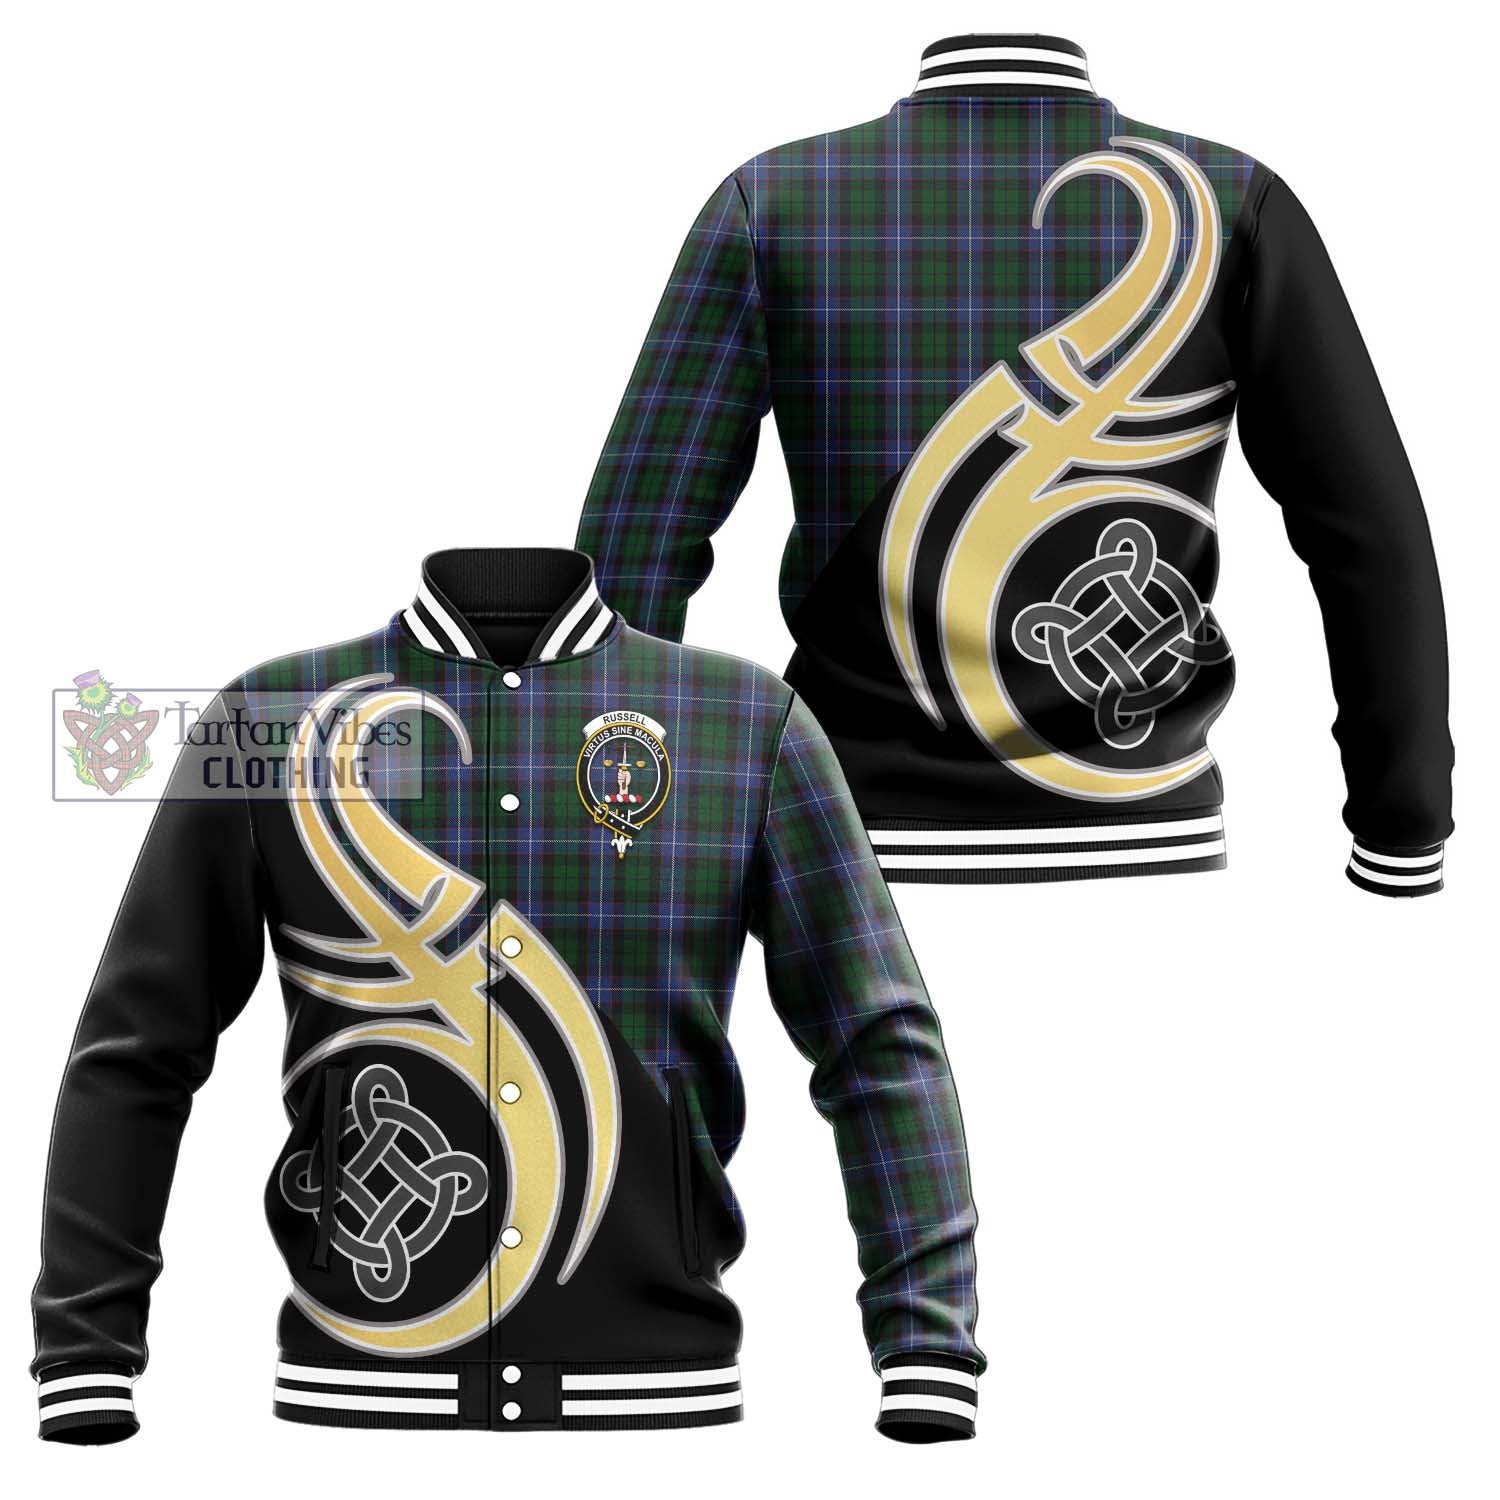 Tartan Vibes Clothing Russell or Mitchell or Hunter or Galbraith Tartan Baseball Jacket with Family Crest and Celtic Symbol Style